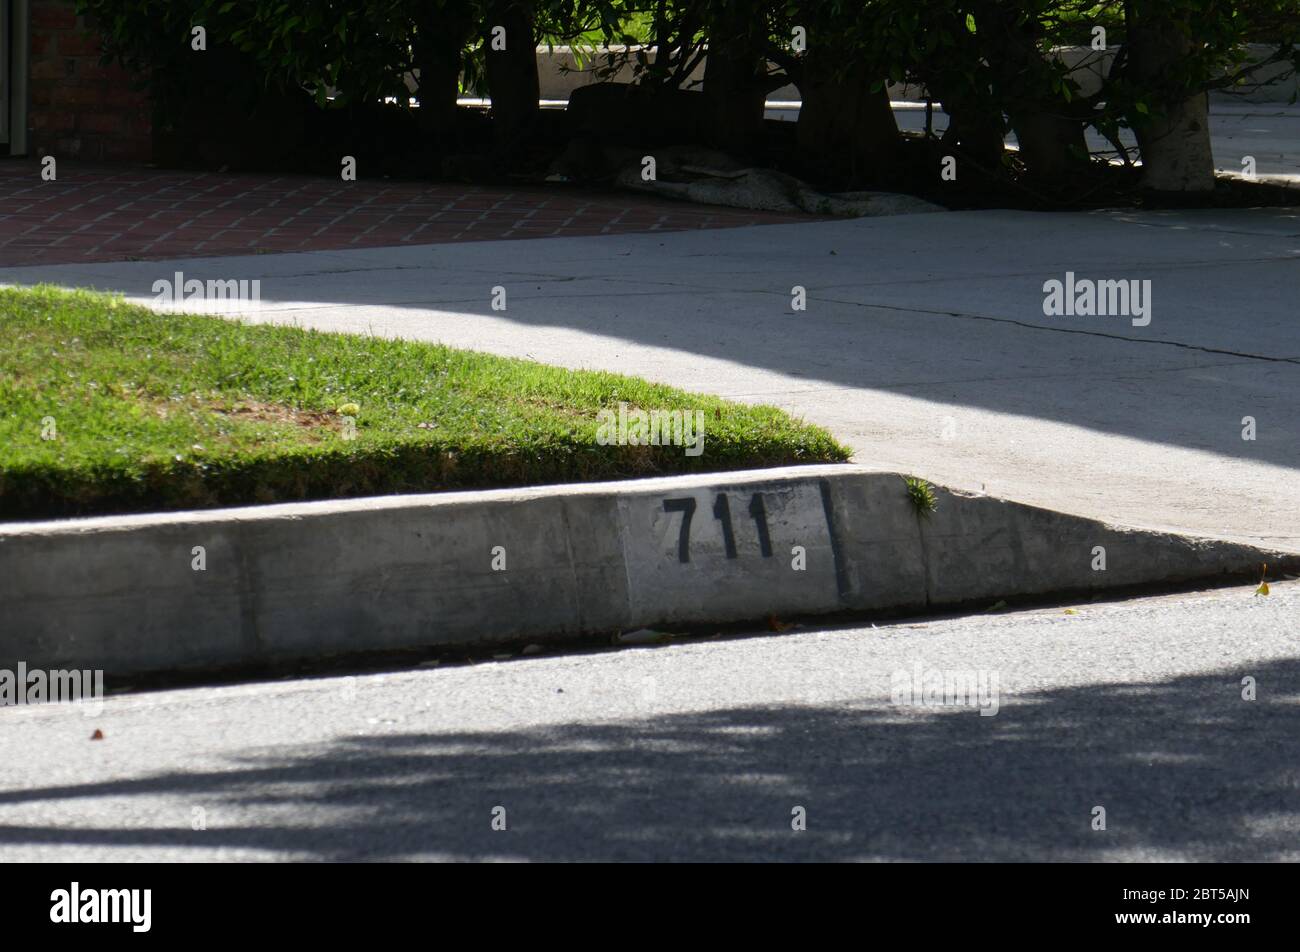 Beverly Hills, California, USA 22nd May 2020 A general view of atmosphere of Joan Blondell's former home at 711 N. Maple Drive on May 22, 2020 in Beverly Hills, California, USA. Photo by Barry King/Alamy Stock Photo Stock Photo